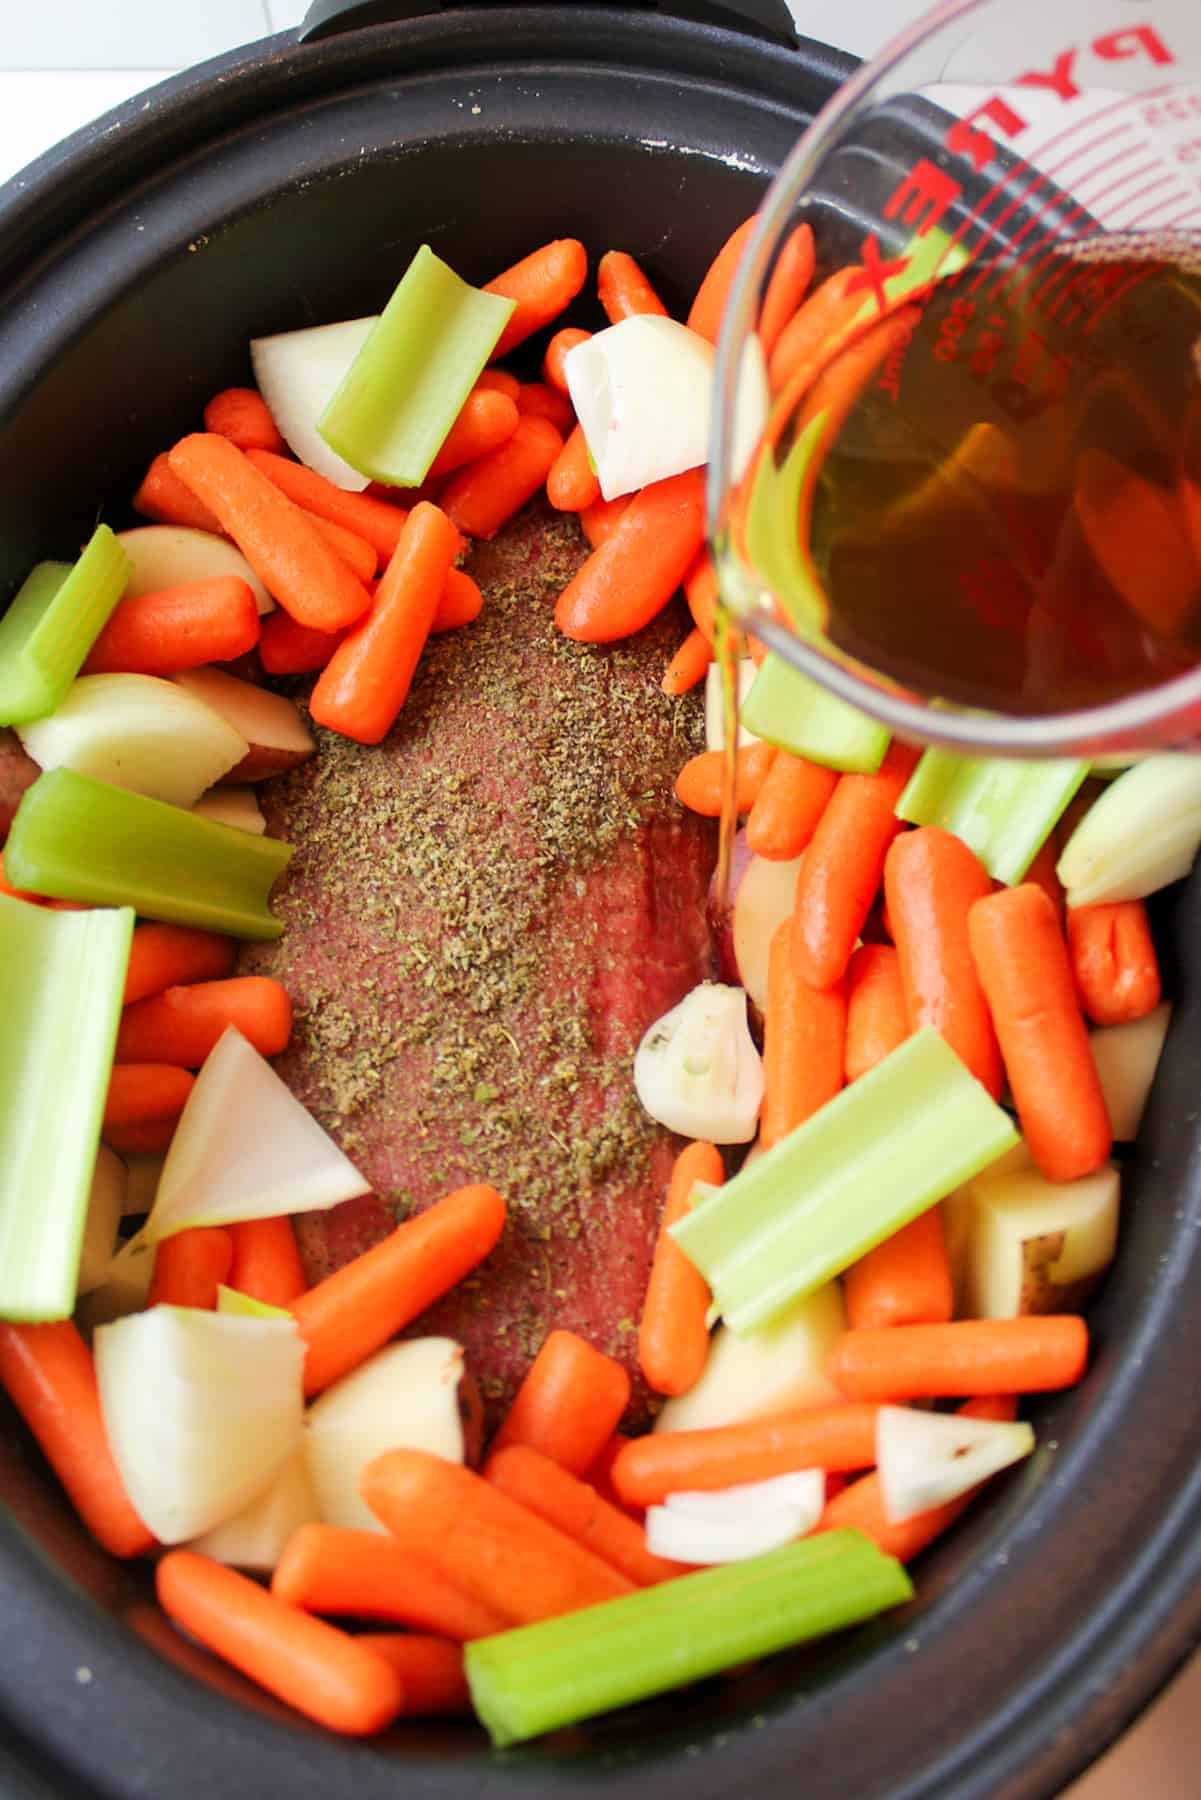 pouring beef broth into the crockpot